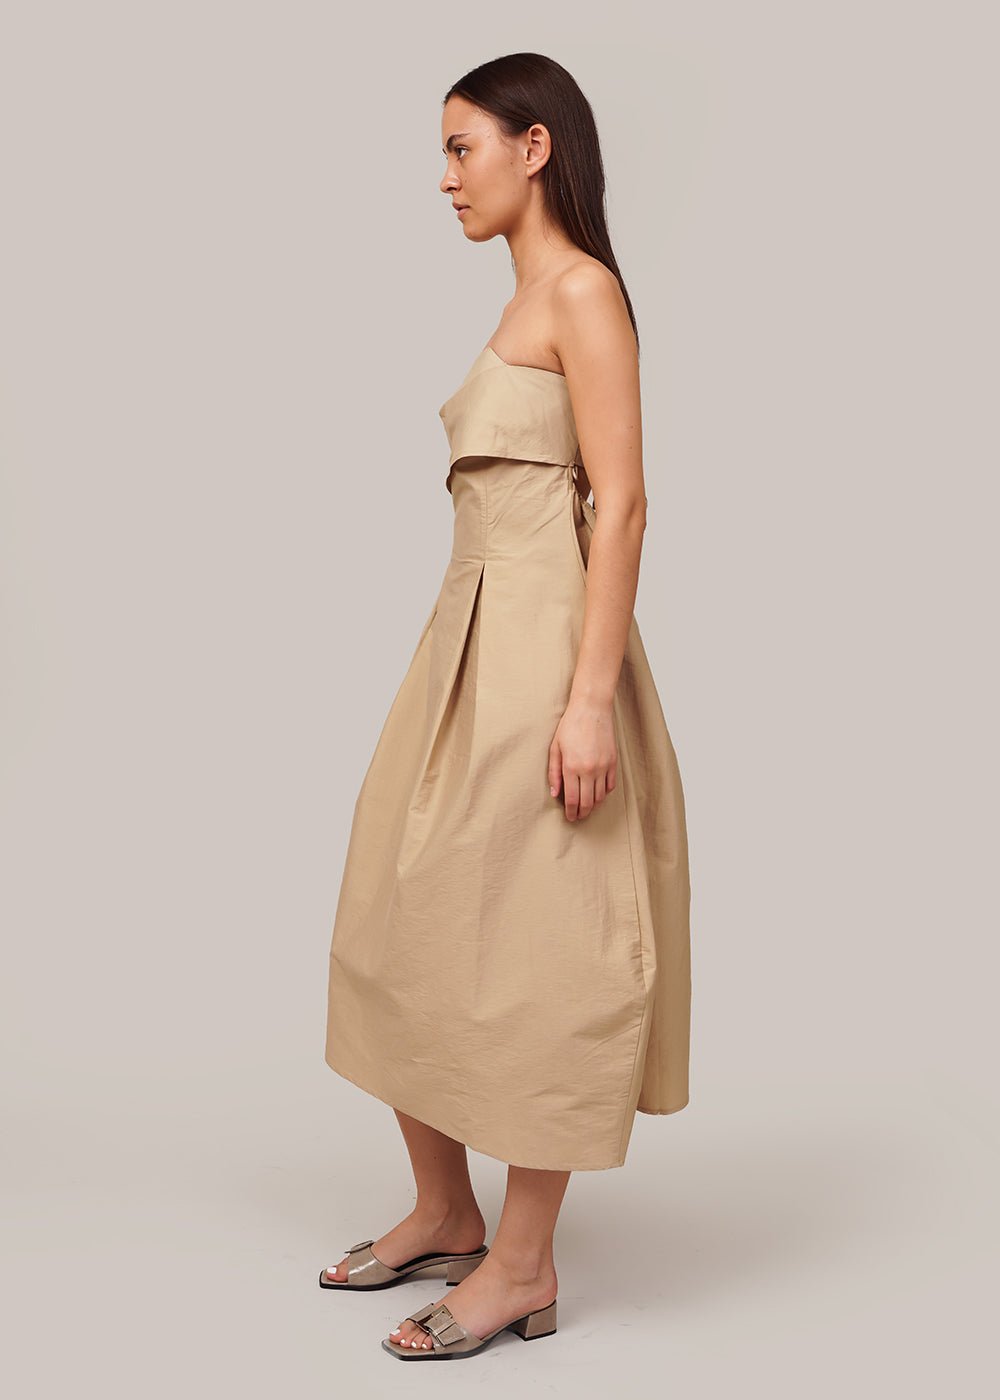 Cordera Toasted Strapless Dress - New Classics Studios Sustainable Ethical Fashion Canada